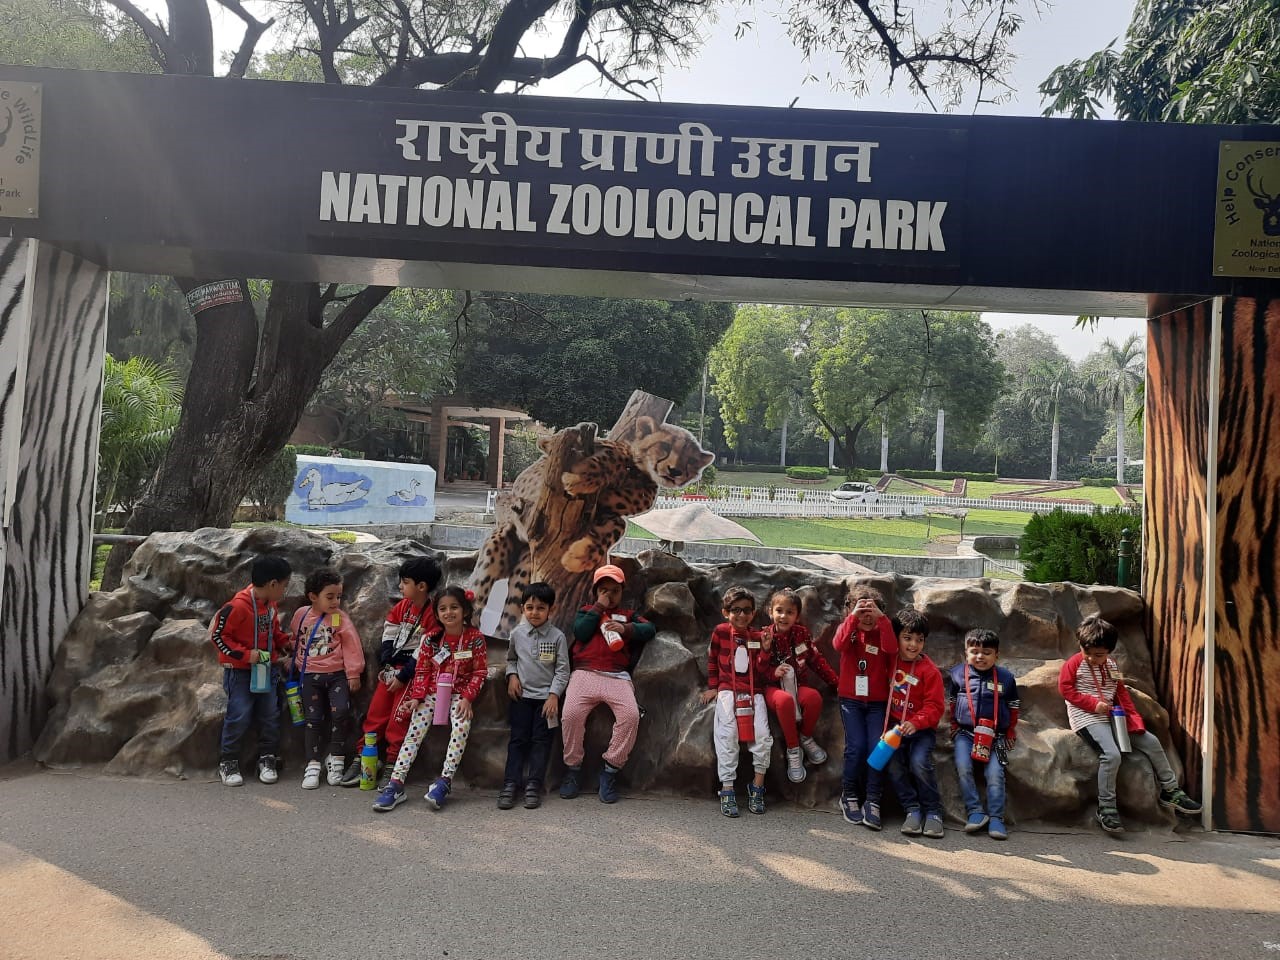 Visit to the National Zoological Park